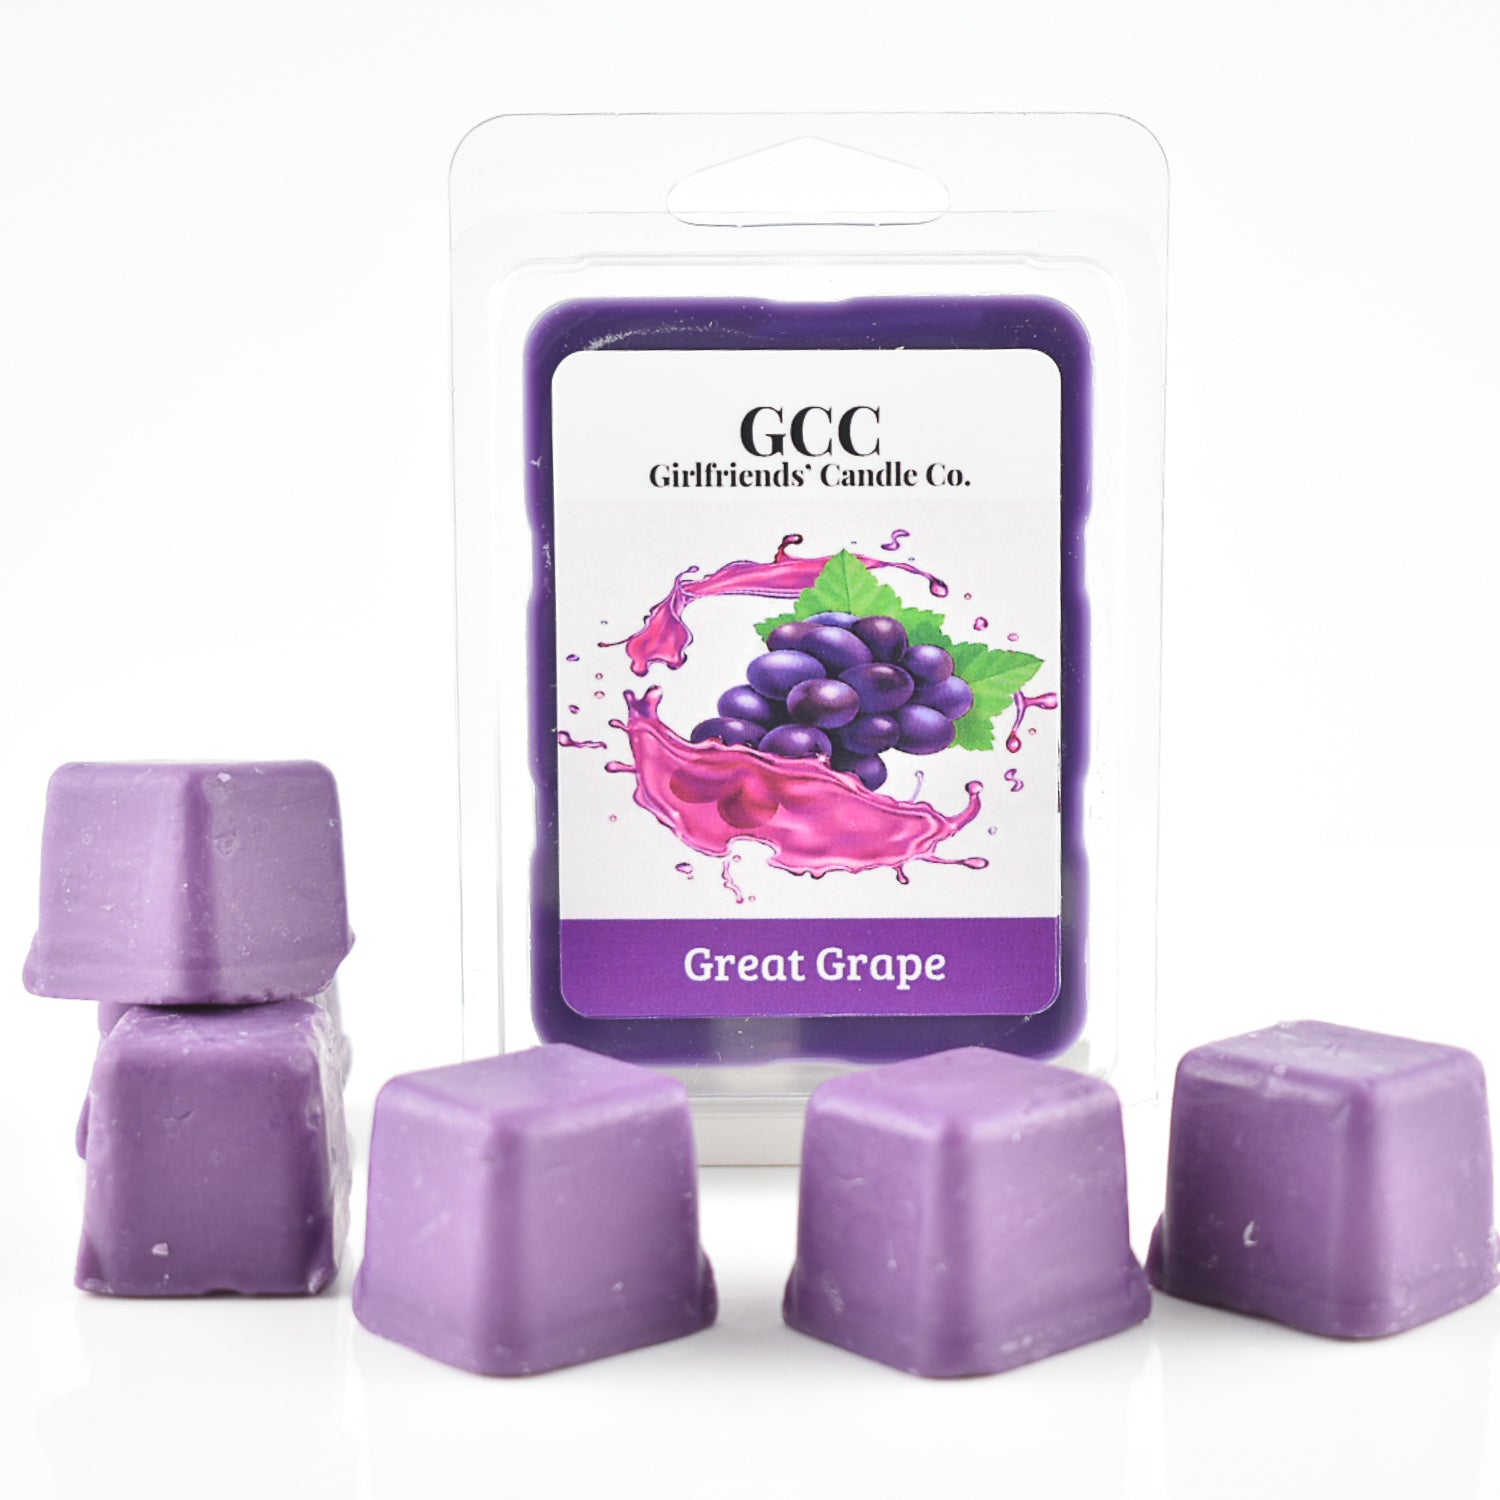 Great Grape Scented Wax Melt